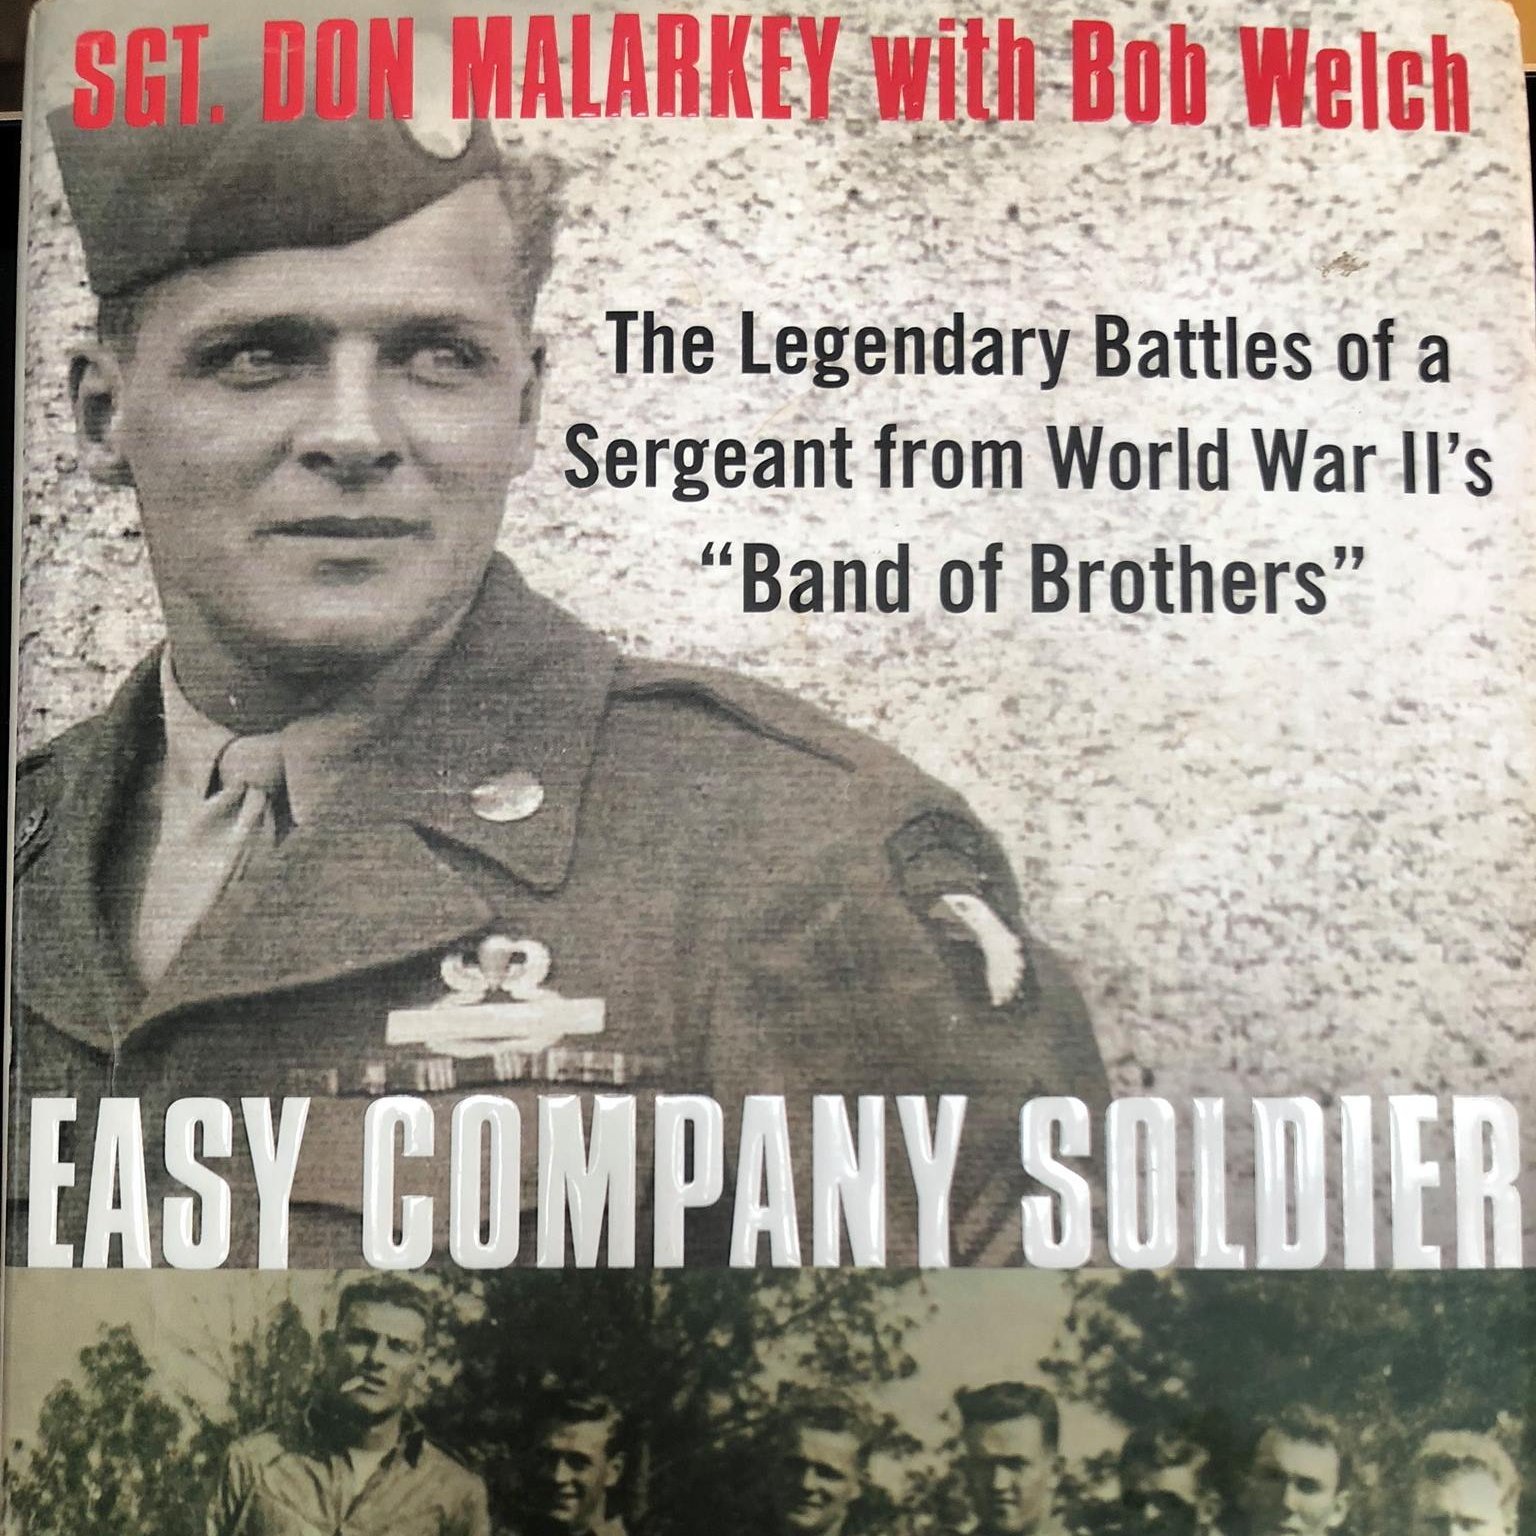 This is my Dad's book, Easy Company Soldier! Just want to connect with people who share my love and respect for Don Malarkey, my Dad!